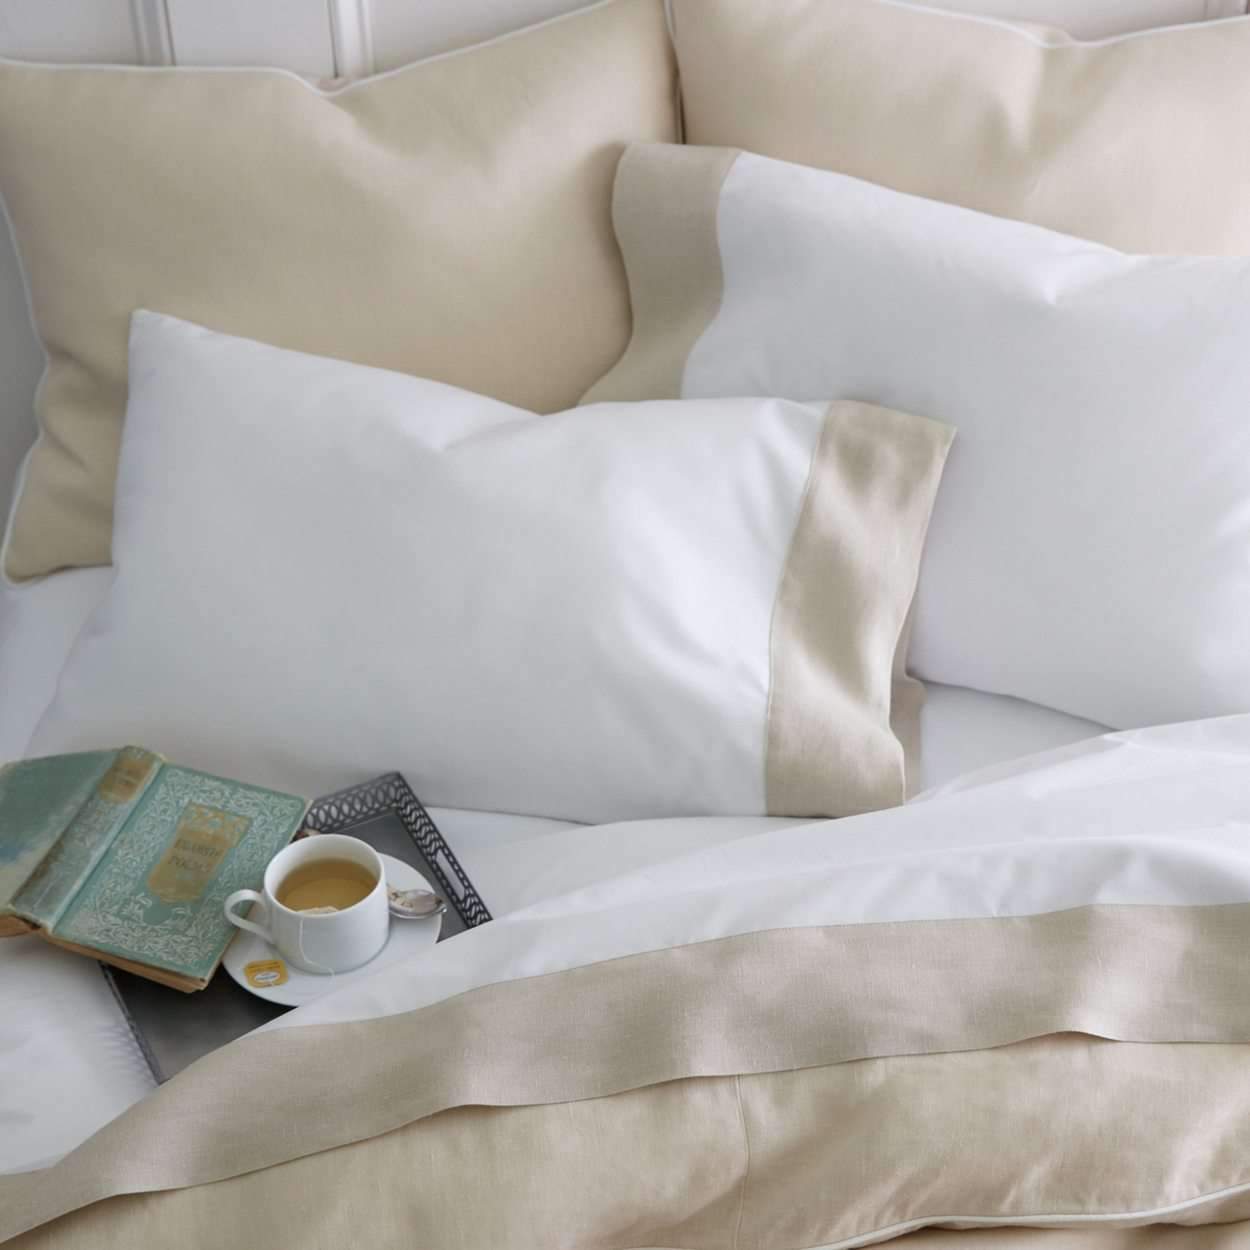 Duvet Covers Mandalay Linen Cuff Duvet Cover by Peacock Alley Peacock Alley